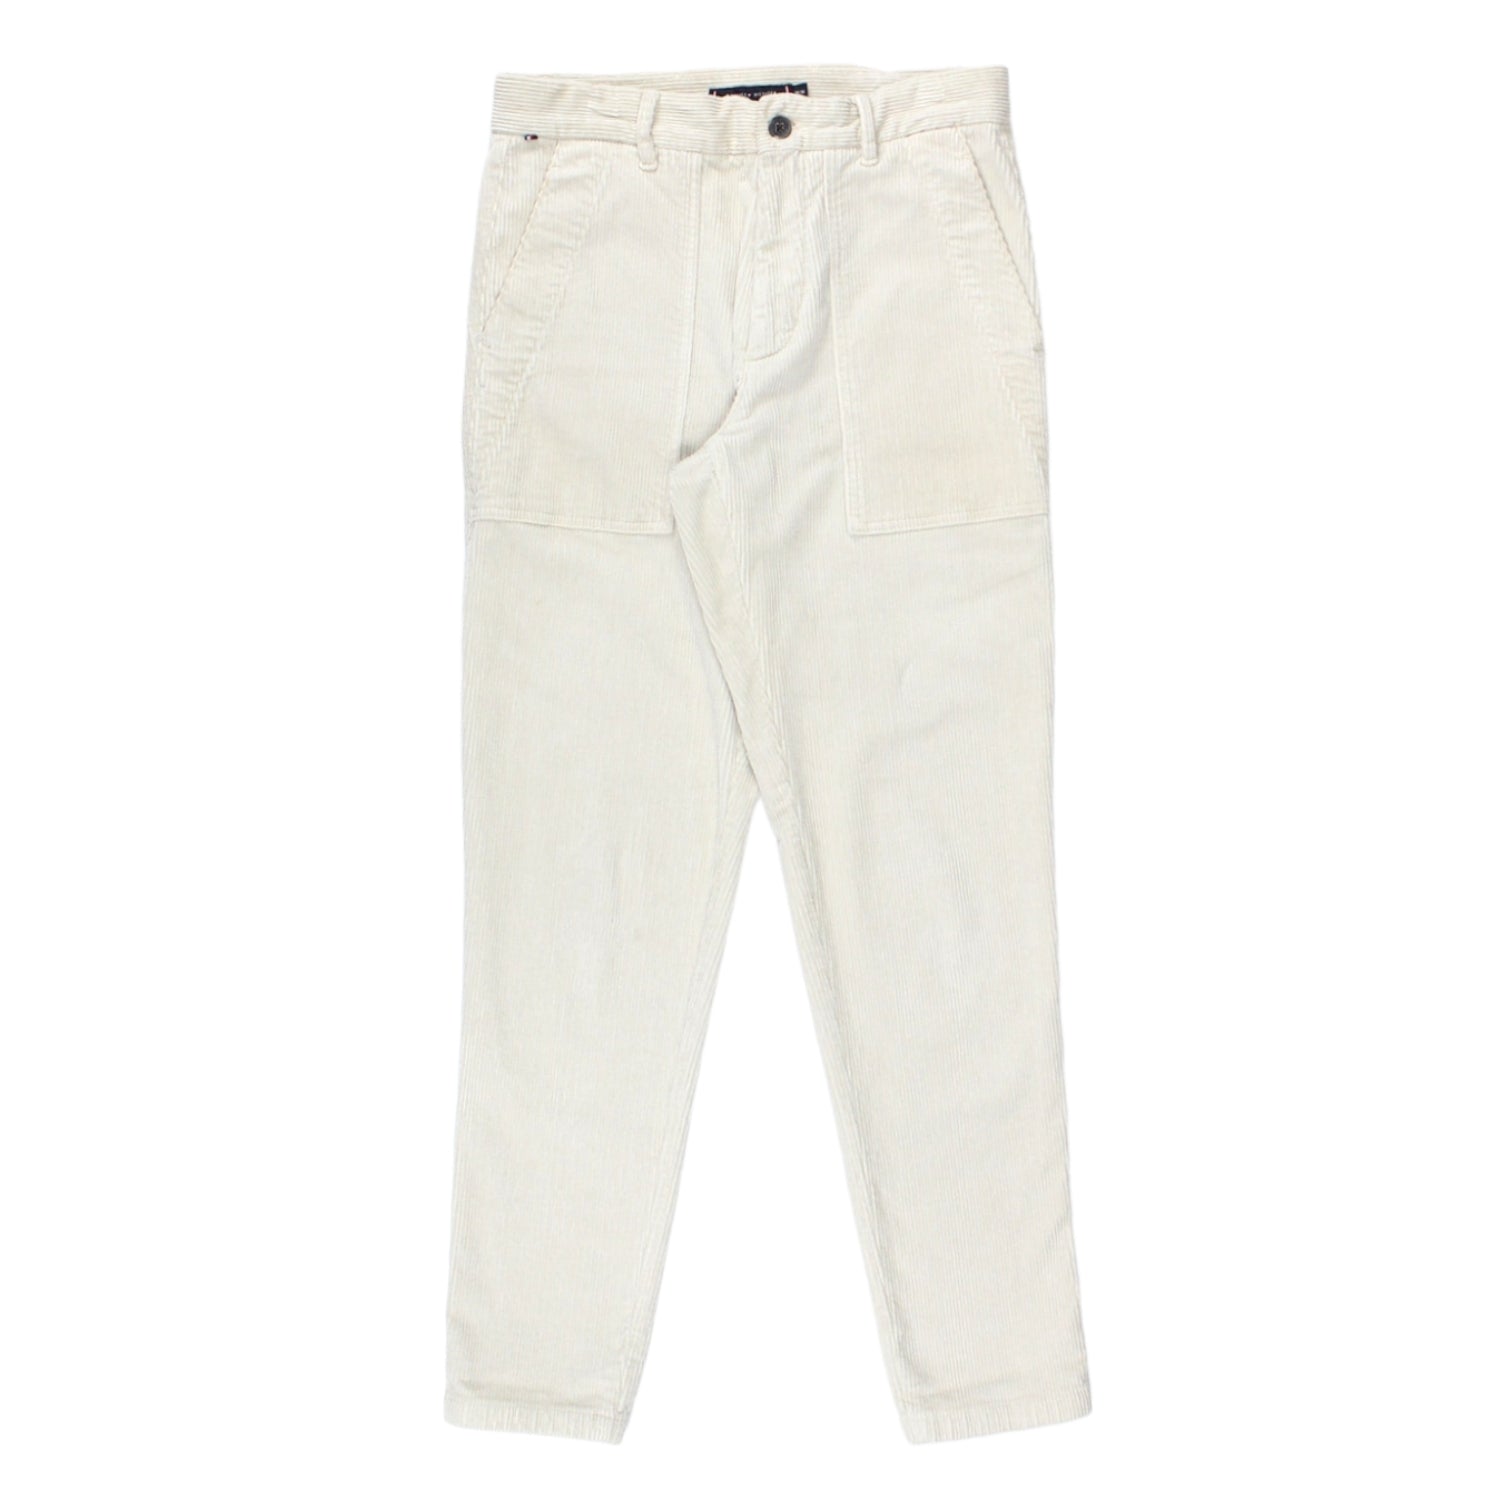 Tommy Hilfiger Cream Cord Trousers